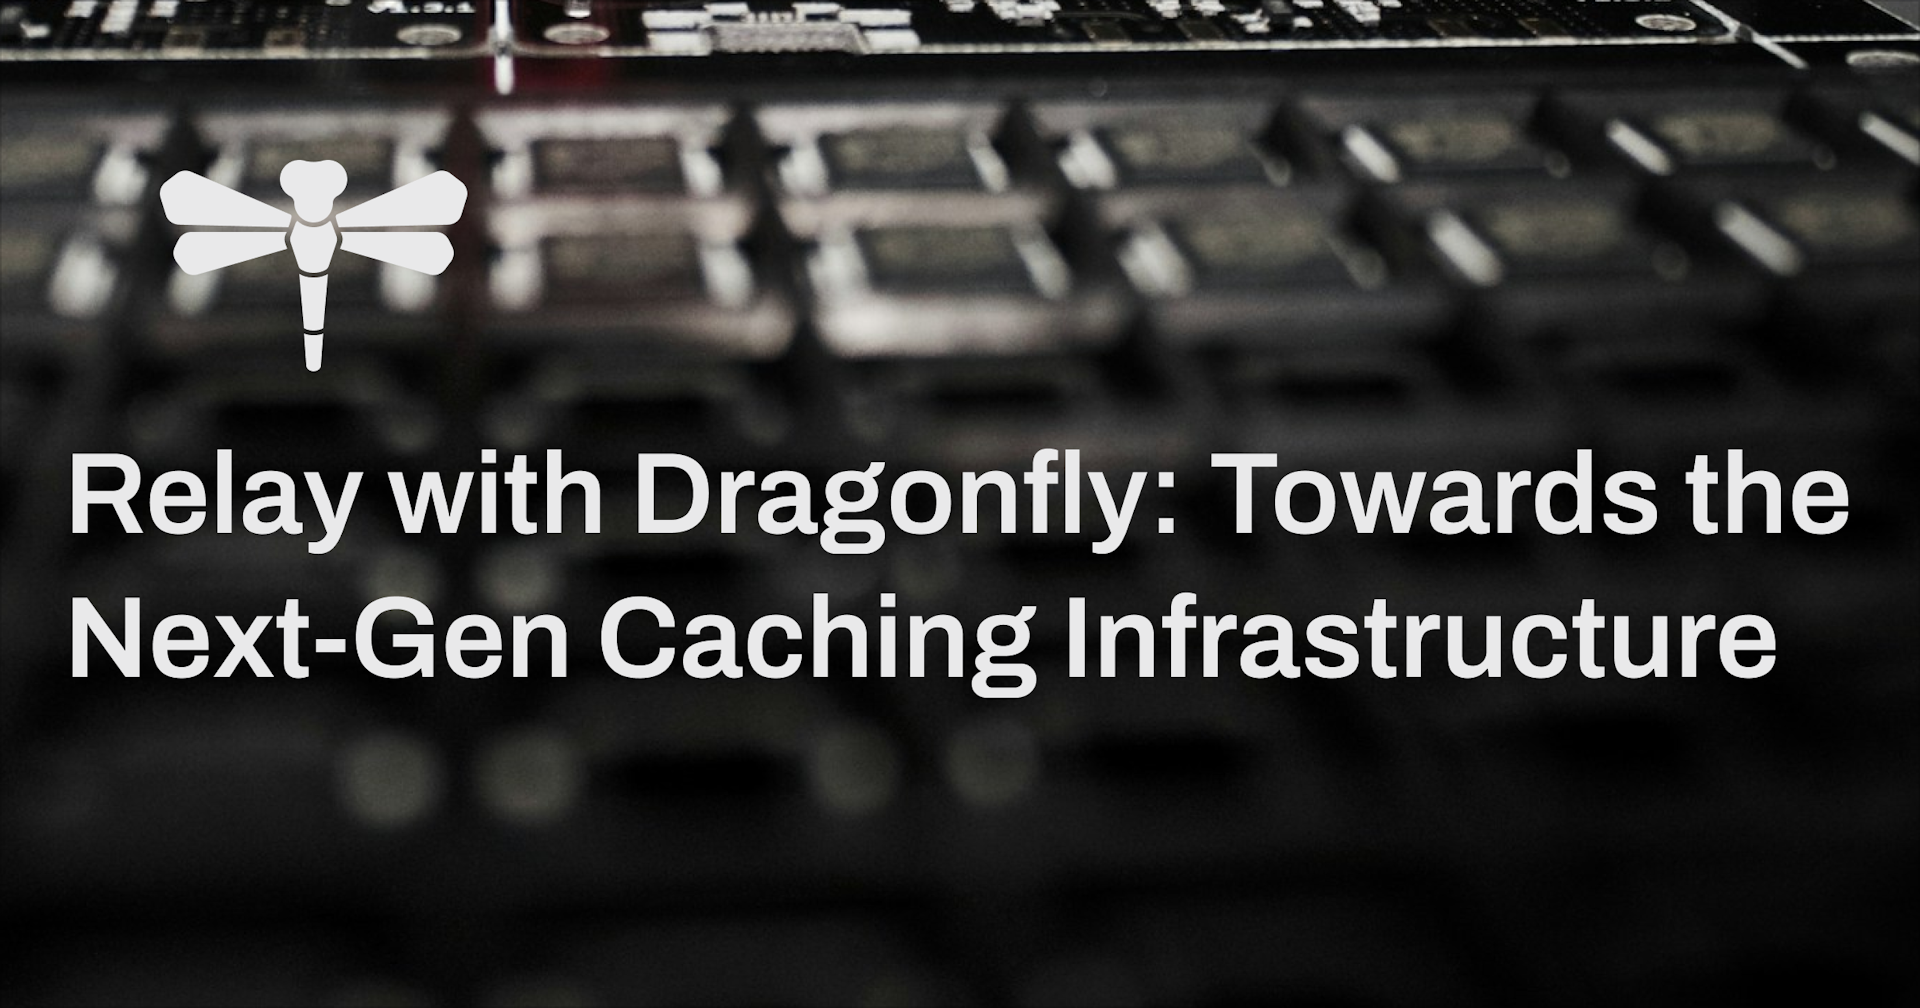 Relay with Dragonfly: Towards the Next-Gen Caching Infrastructure